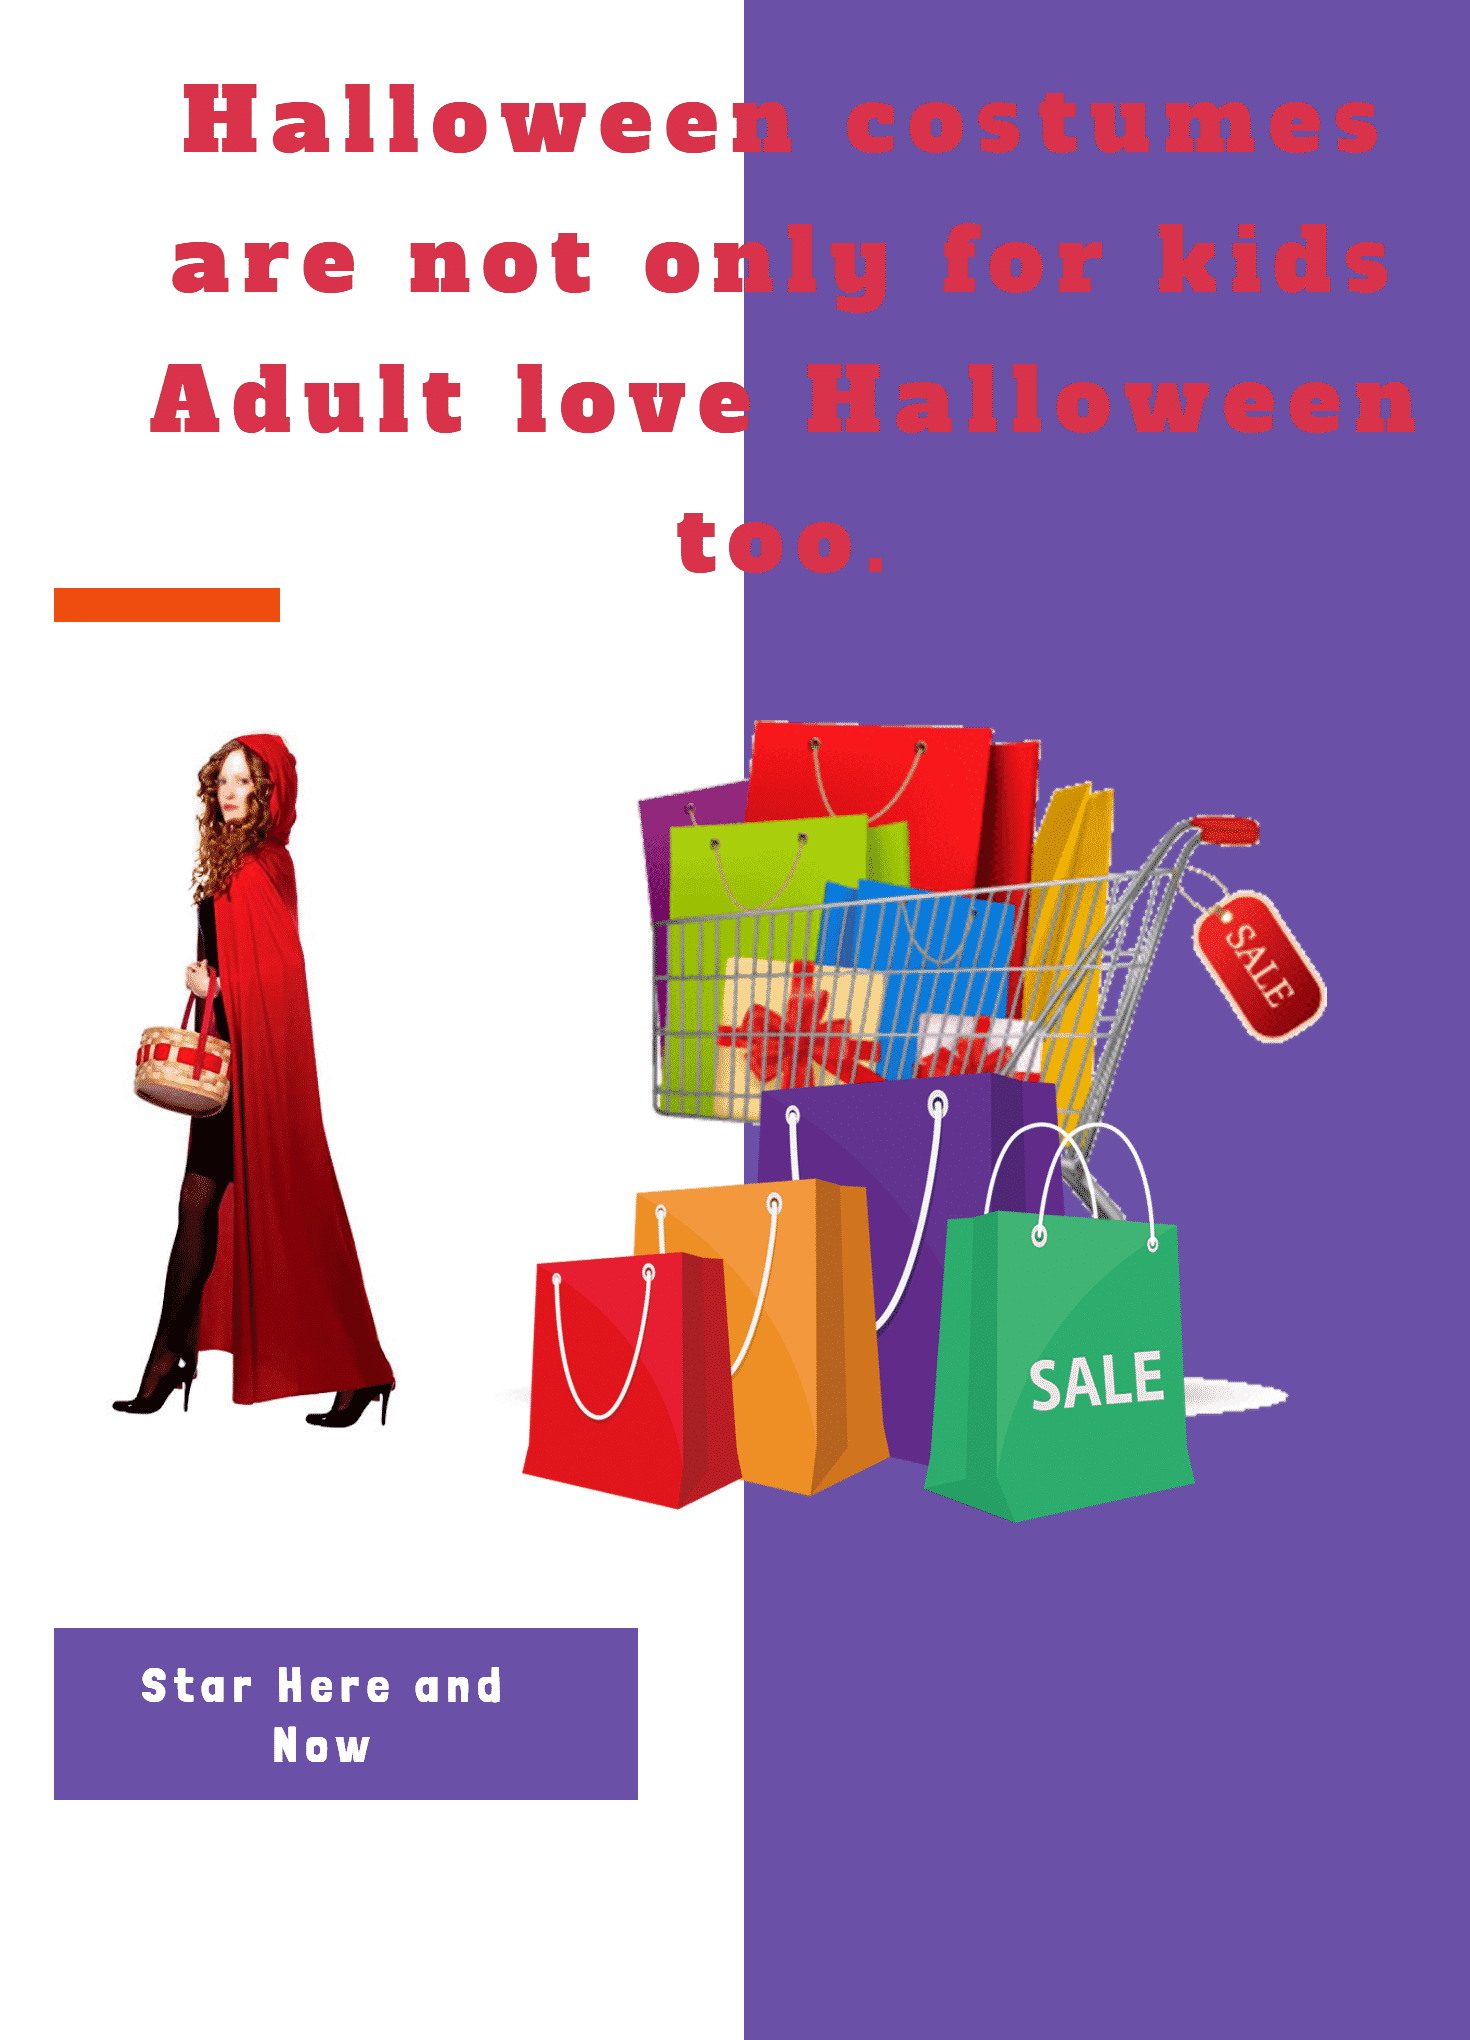 Halloween costumes is not only for kids Adult love Halloween too.